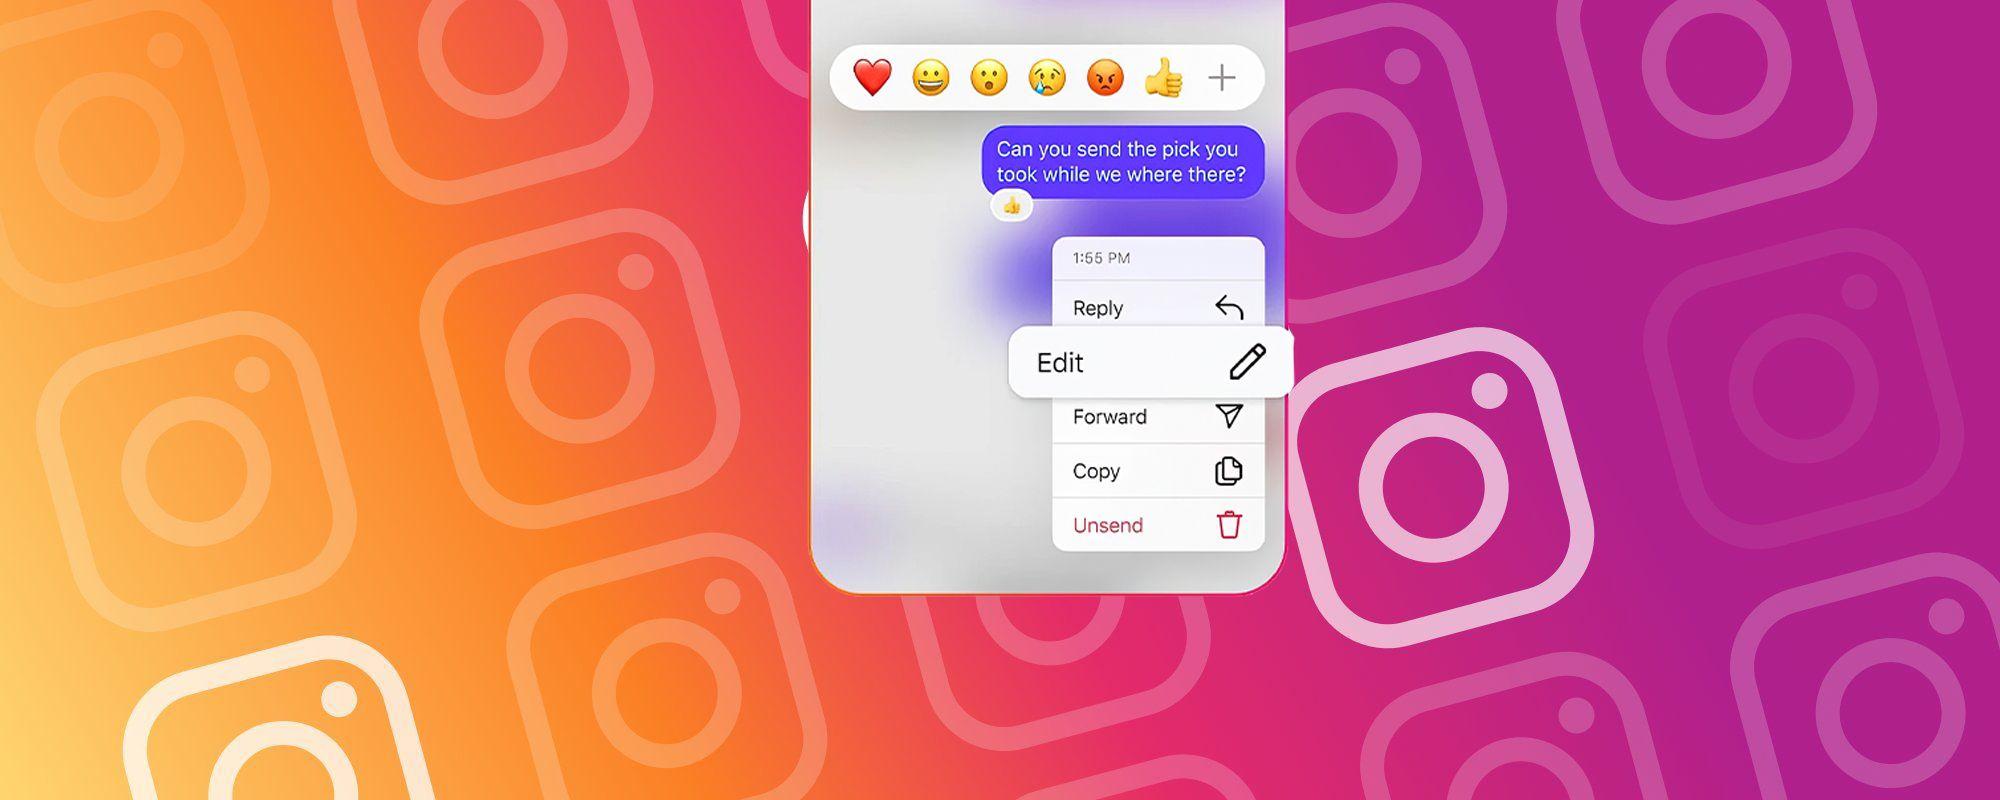 Instagram now allow users to edit messages and pin chats